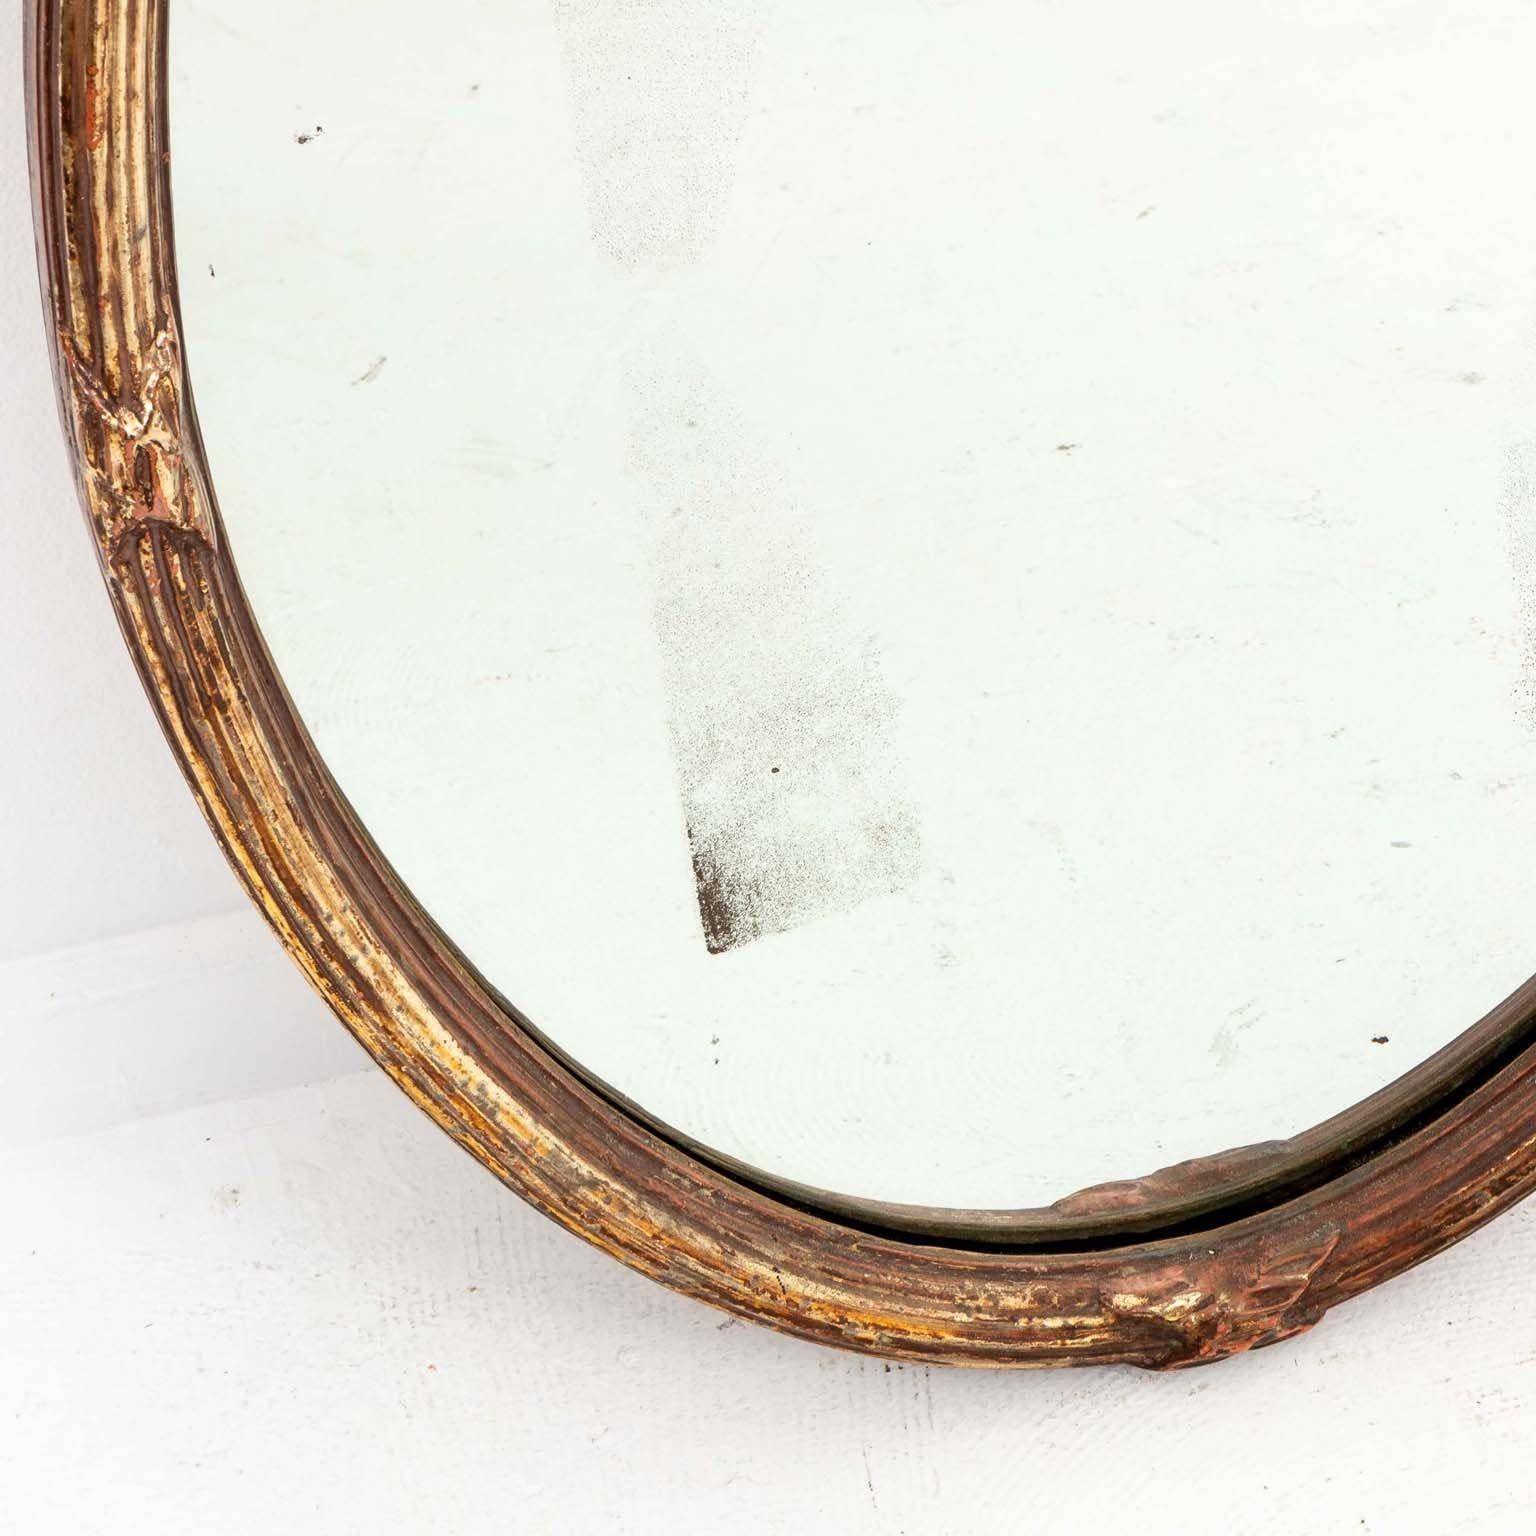 This exquisite French giltwood oval mirror from the early 20th century epitomizes timeless elegance and craftsmanship. Adorned with gilded details, the frame exudes opulence and sophistication. Its crowning glory is a gracefully sculpted bow, adding